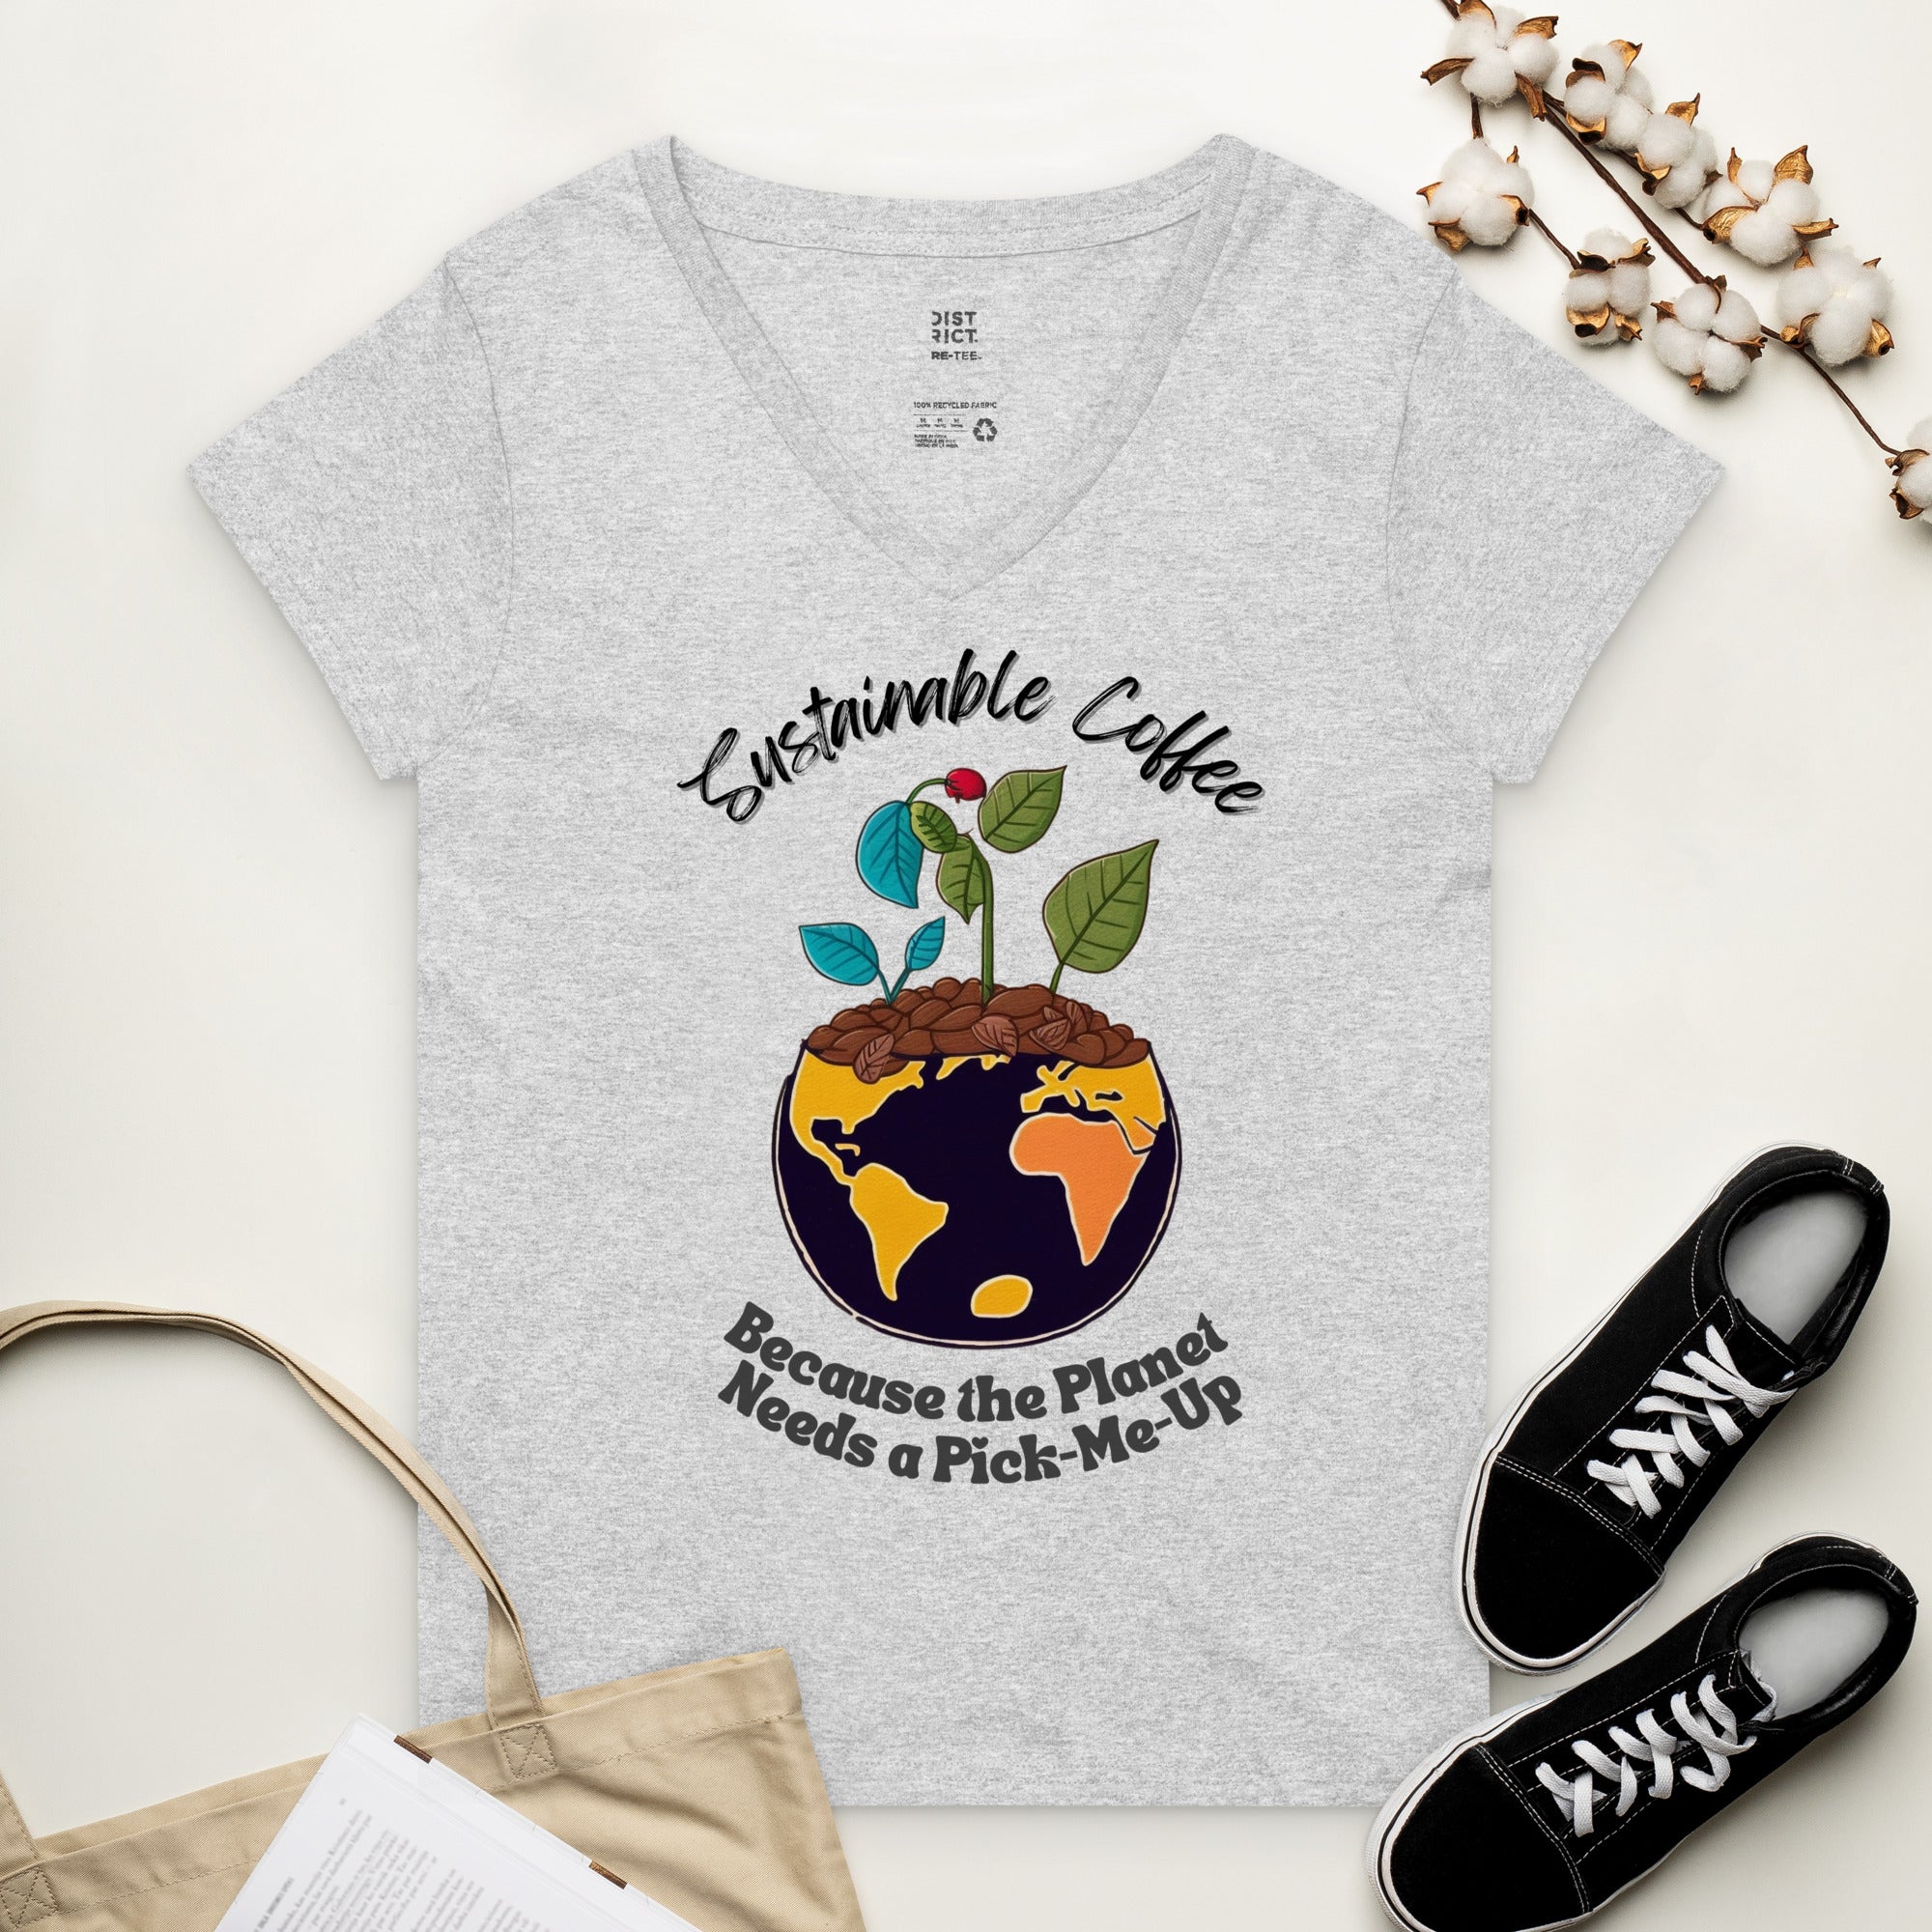 Sustainable Coffee Planet V-Neck Tee" by The Great Coffee Pro – The Great Project